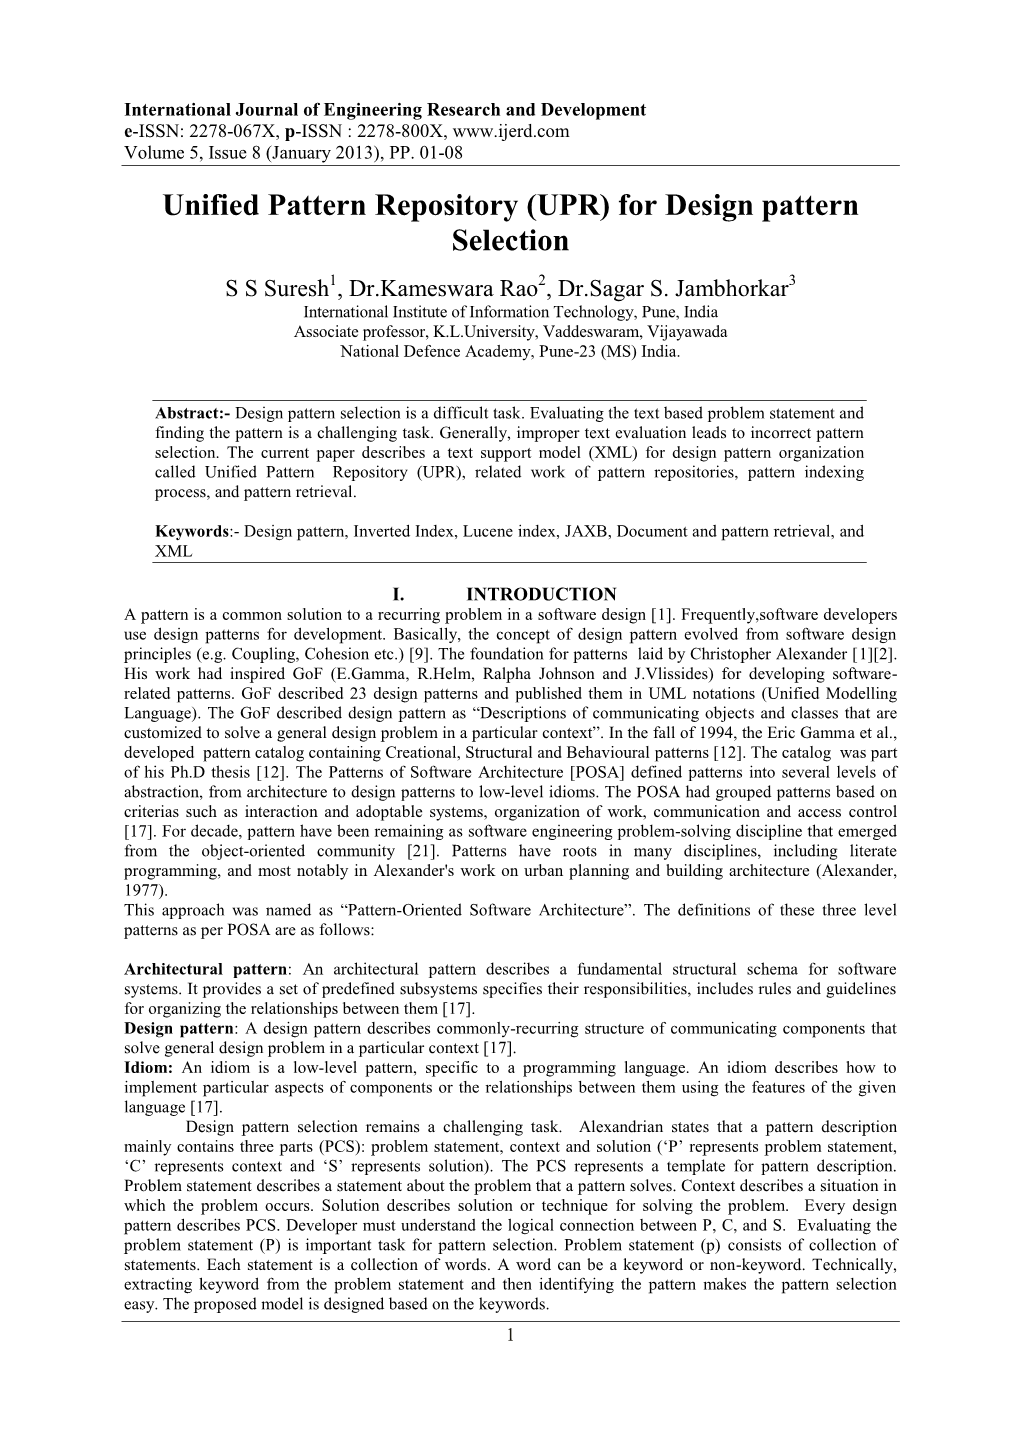 Unified Pattern Repository (UPR) for Design Pattern Selection S S Suresh1, Dr.Kameswara Rao2, Dr.Sagar S